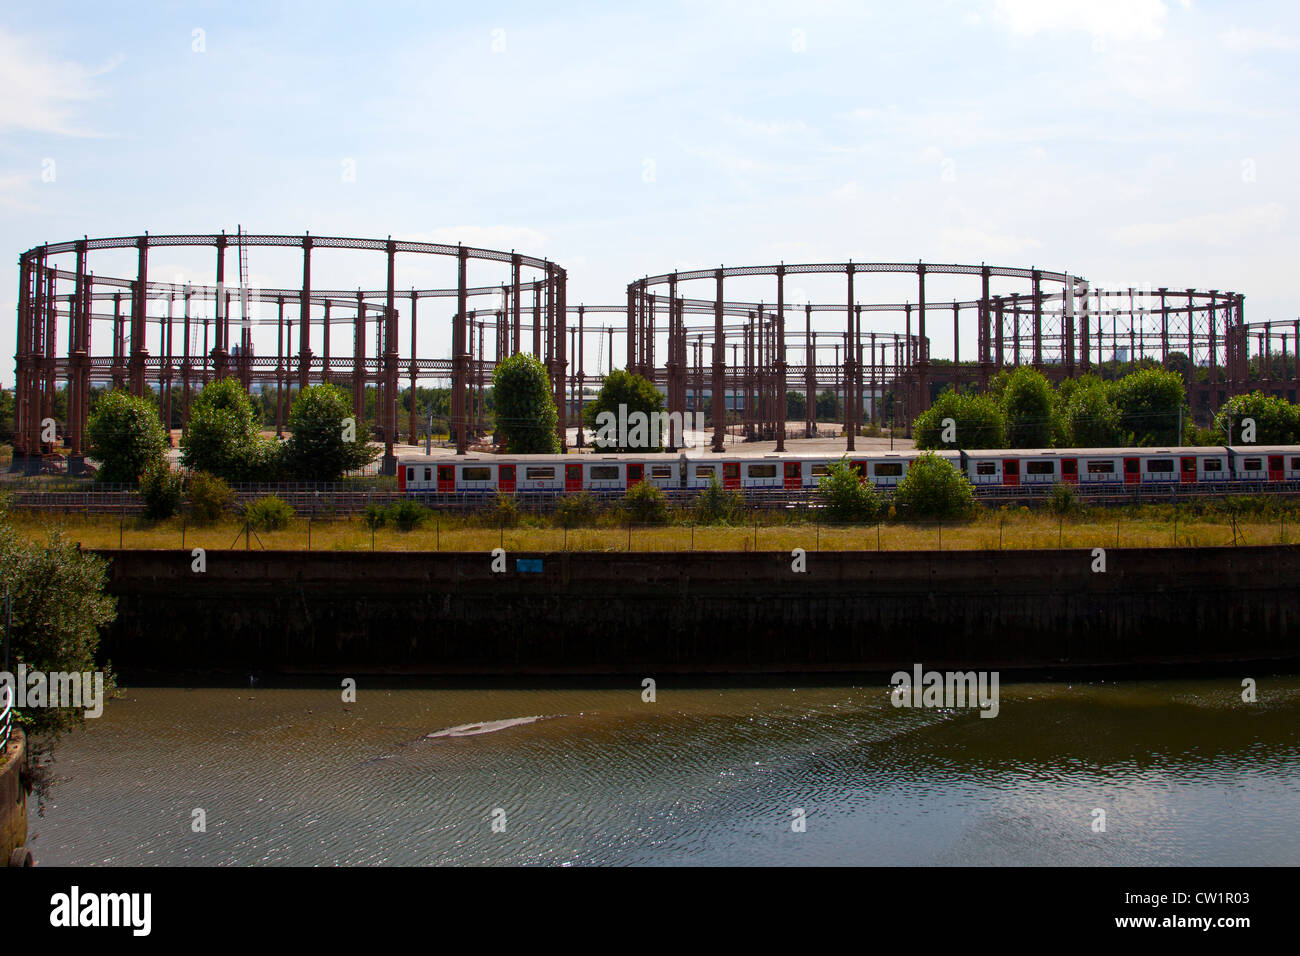 Tube train passing in front of Gasometer's of Bow gasworks, near Bow Back Rivers, Stratford, London England, UK. Stock Photo